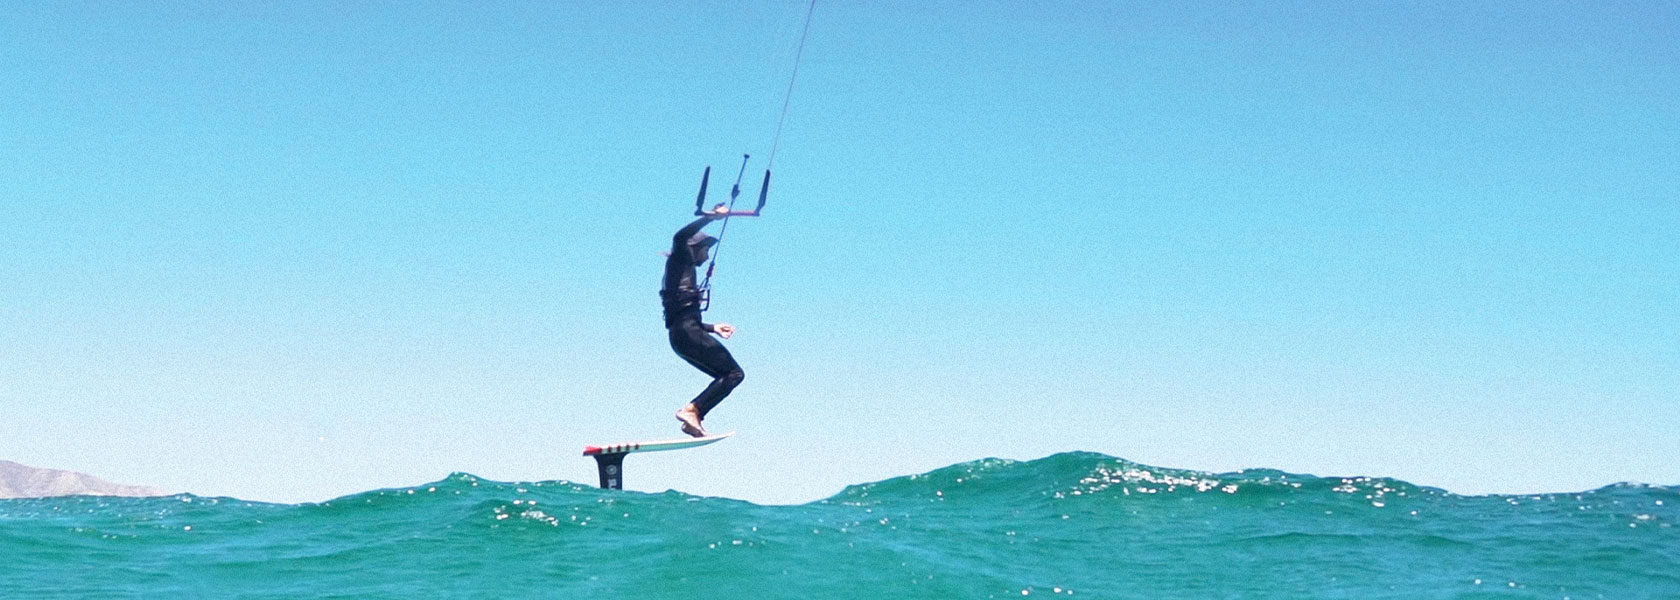 Fred Hope kitefoil style